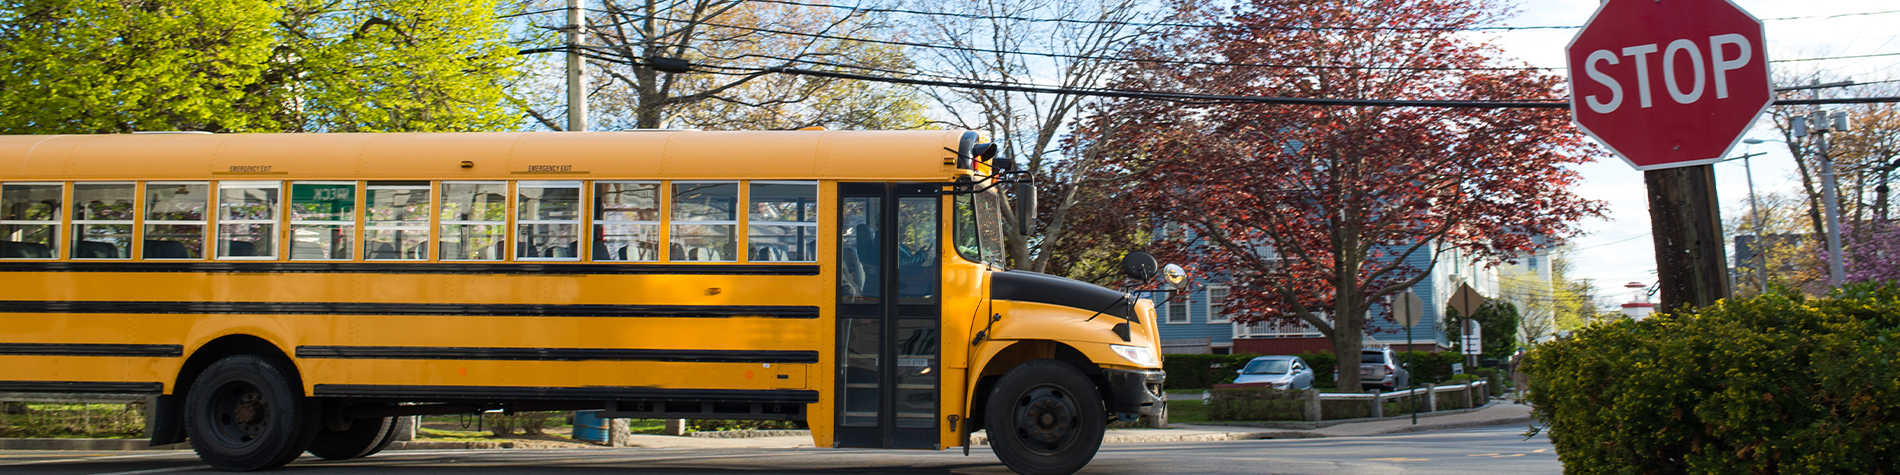 <p class="slider-title">Register Now for Yellow School Bus Service</p><div class="banner-line"></div><p class="slider-subtitle">Families must register by June 16 to be added to routes of the start of the next school year.</p> <a style="pointer-events:all" class=AEBannerMoreLink href="https://cbe.ab.ca/news-centre/Pages/register-now-for-yellow-school-bus-service.aspx">Read More</a>